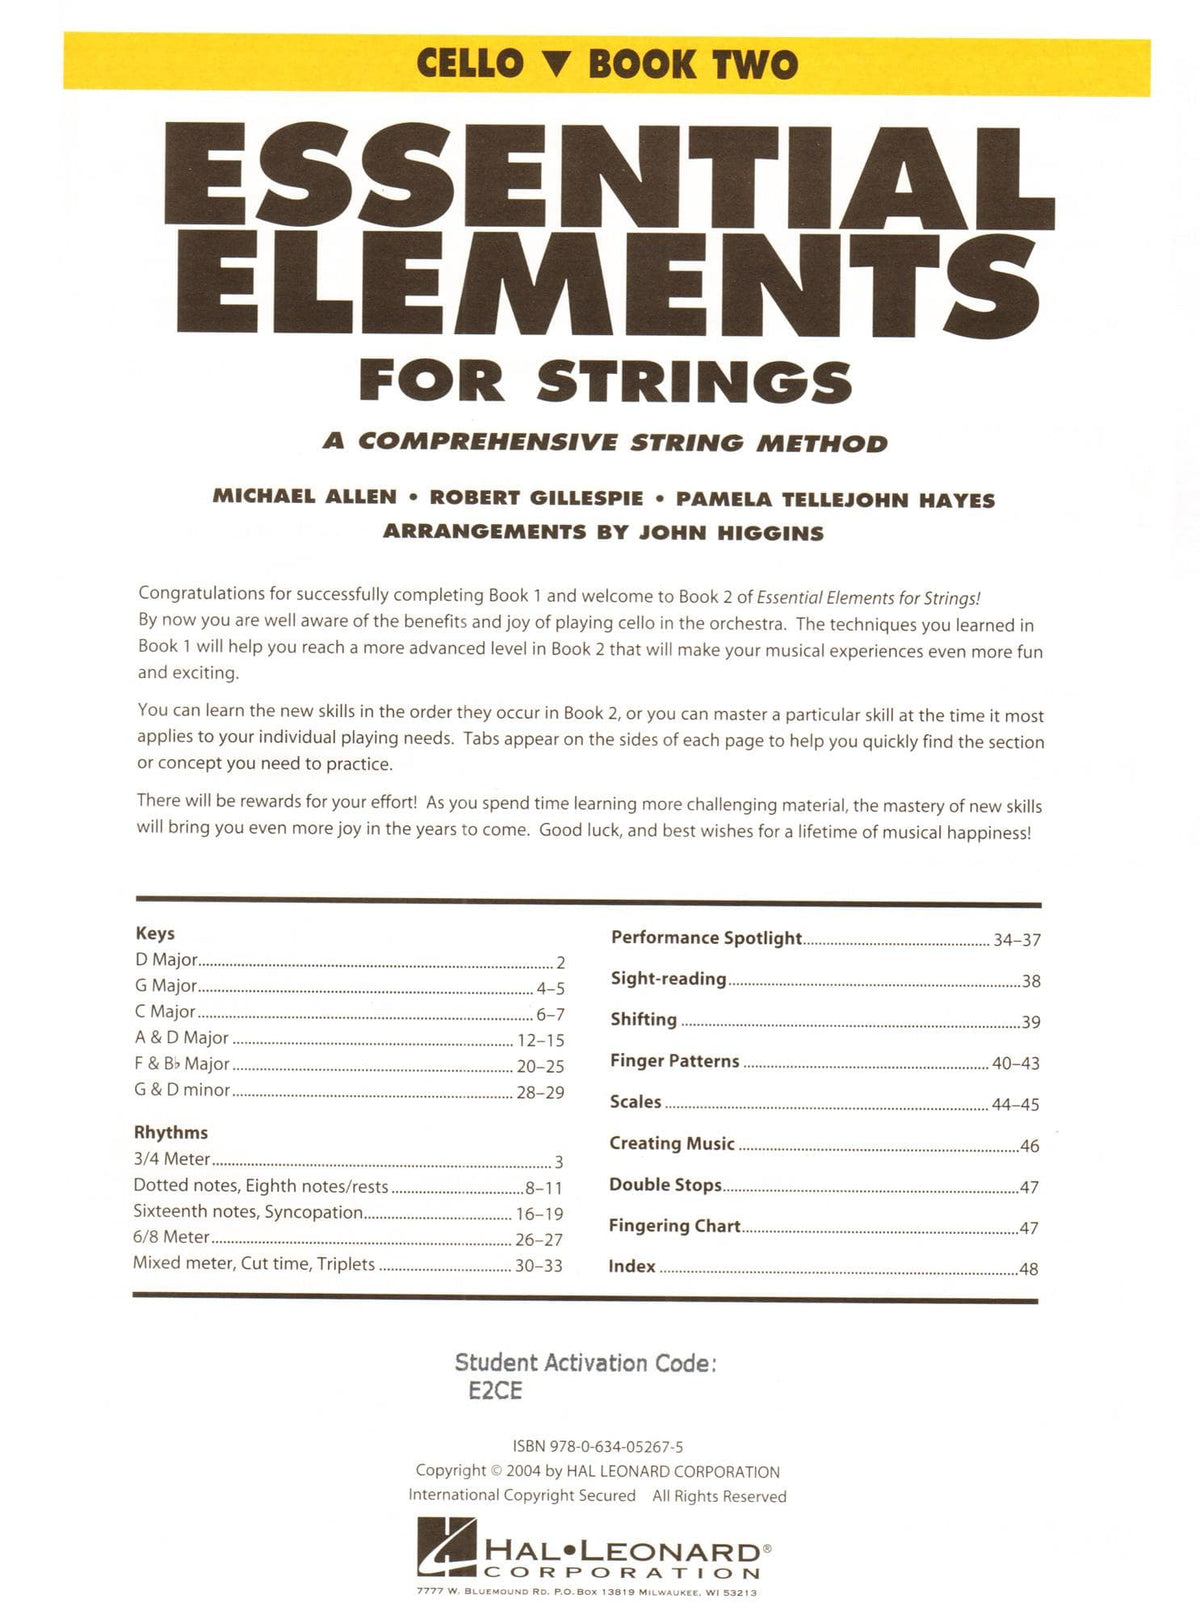 Essential Elements Interactive (formerly 2000) for Strings - Cello Book 2 - by Allen/Gillespie/Hayes - Hal Leonard Publication